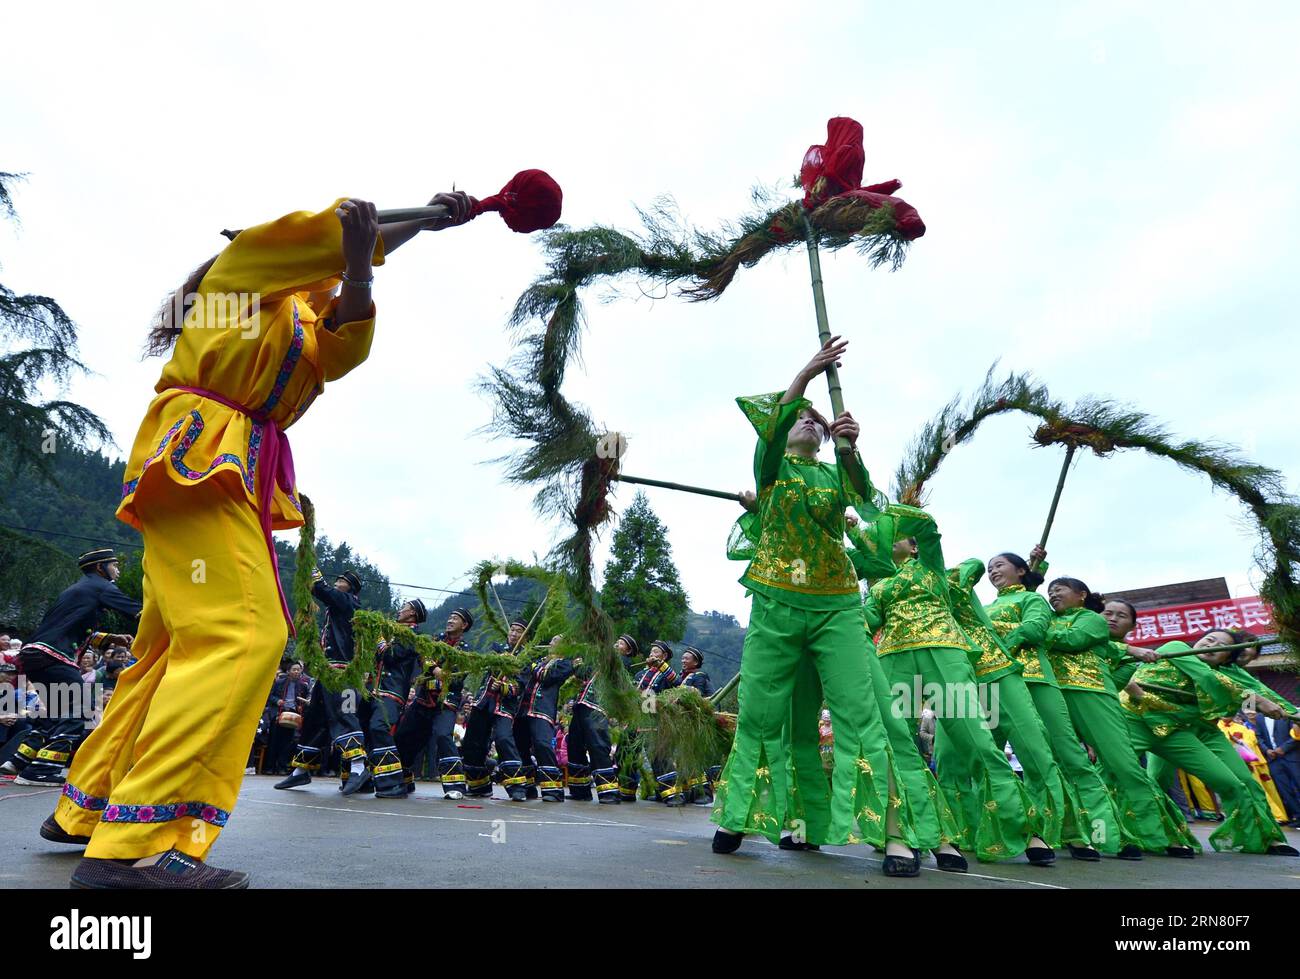 (150928) -- ENSHI, Sept. 28, 2015 -- People of Tujia Ethnicity celebrate Mid-Autumn Festival with straw dragon dance in Longtan village, Xuan en county, Enshi, Hubei Province, Sept. 27, 2015. The straw dragon dance was originally a ritual event of Tujia Ethnicity, and was listed in the Provincial intangible cultural heritage of Hubei in 2013. ) (dhf) CHINA-HUBEI-ENSHI-TUJIA ETHNICITY-MID-AUTUMN FESTIVAL (CN) SongxWen PUBLICATIONxNOTxINxCHN   Enshi Sept 28 2015 Celebrities of Tujia ethnicity Celebrate Mid Autumn Festival With Straw Dragon Dance in Longtan Village Xuan en County Enshi Hubei Prov Stock Photo